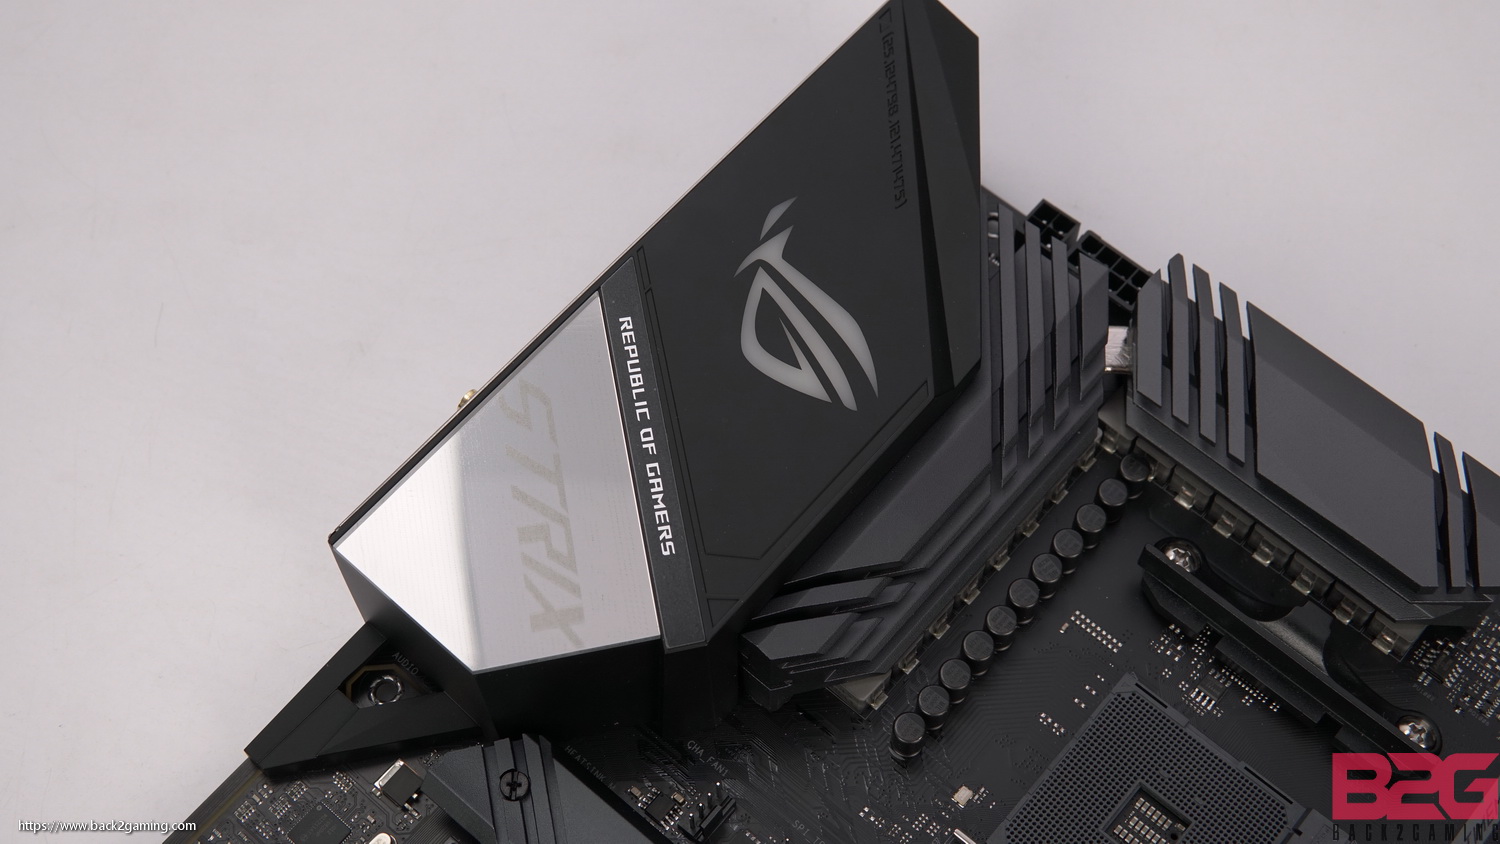 ASUS ROG Strix X570-E GAMING Motherboard Review - rog strix x570-e gaming